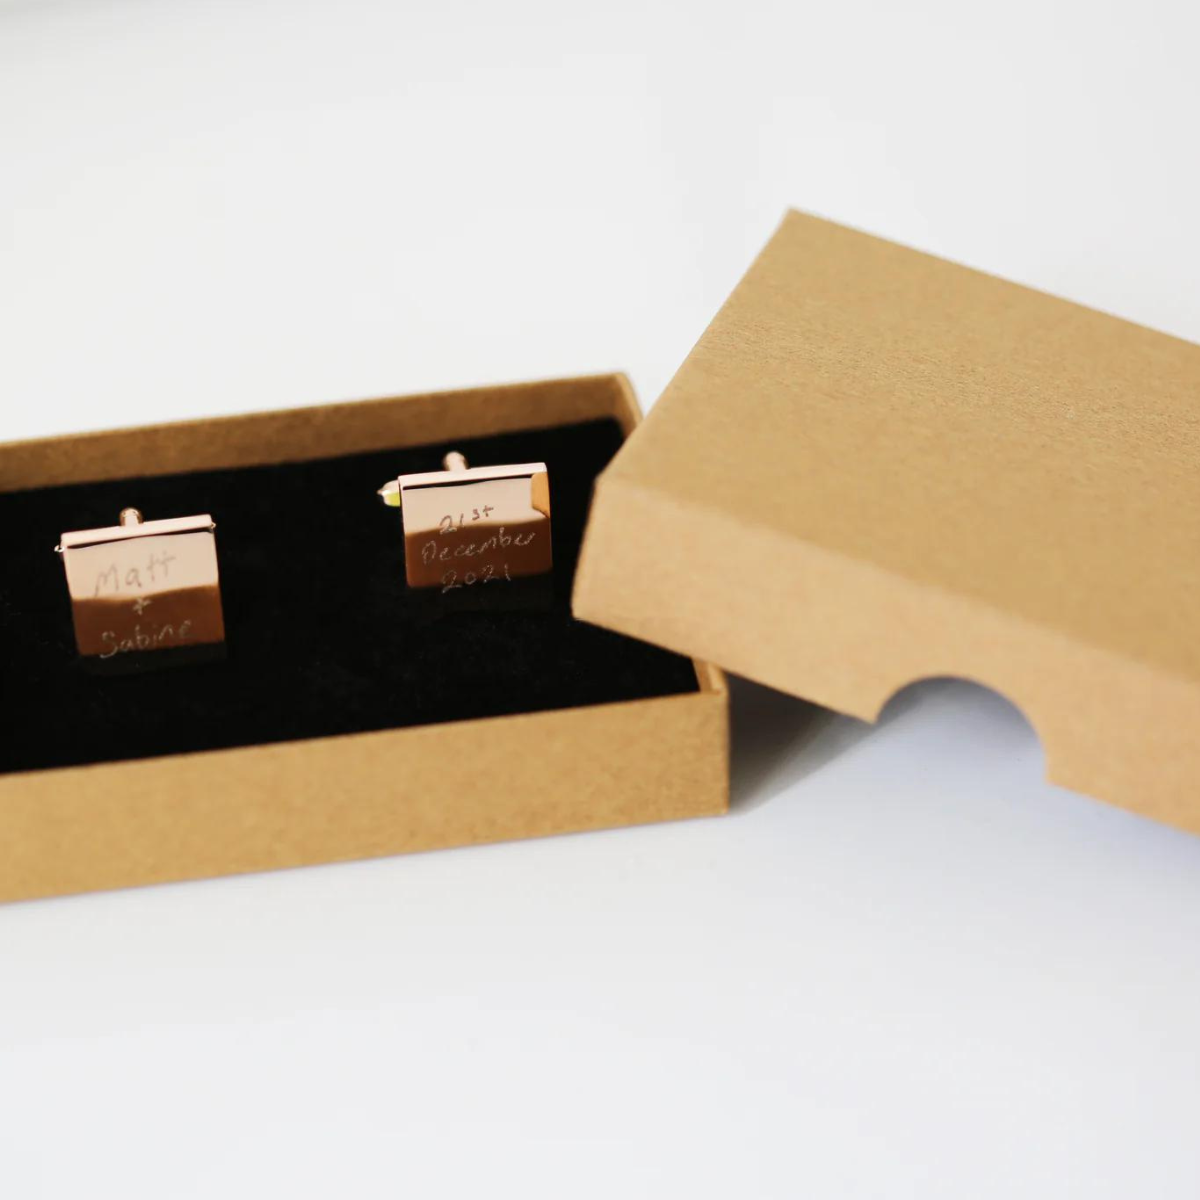 Image of a pair of cufflinks that can each be engraved with your own handwritten message. The cufflinks are available with either a silver or rose gold coloured finish, with a standard eco gift box.